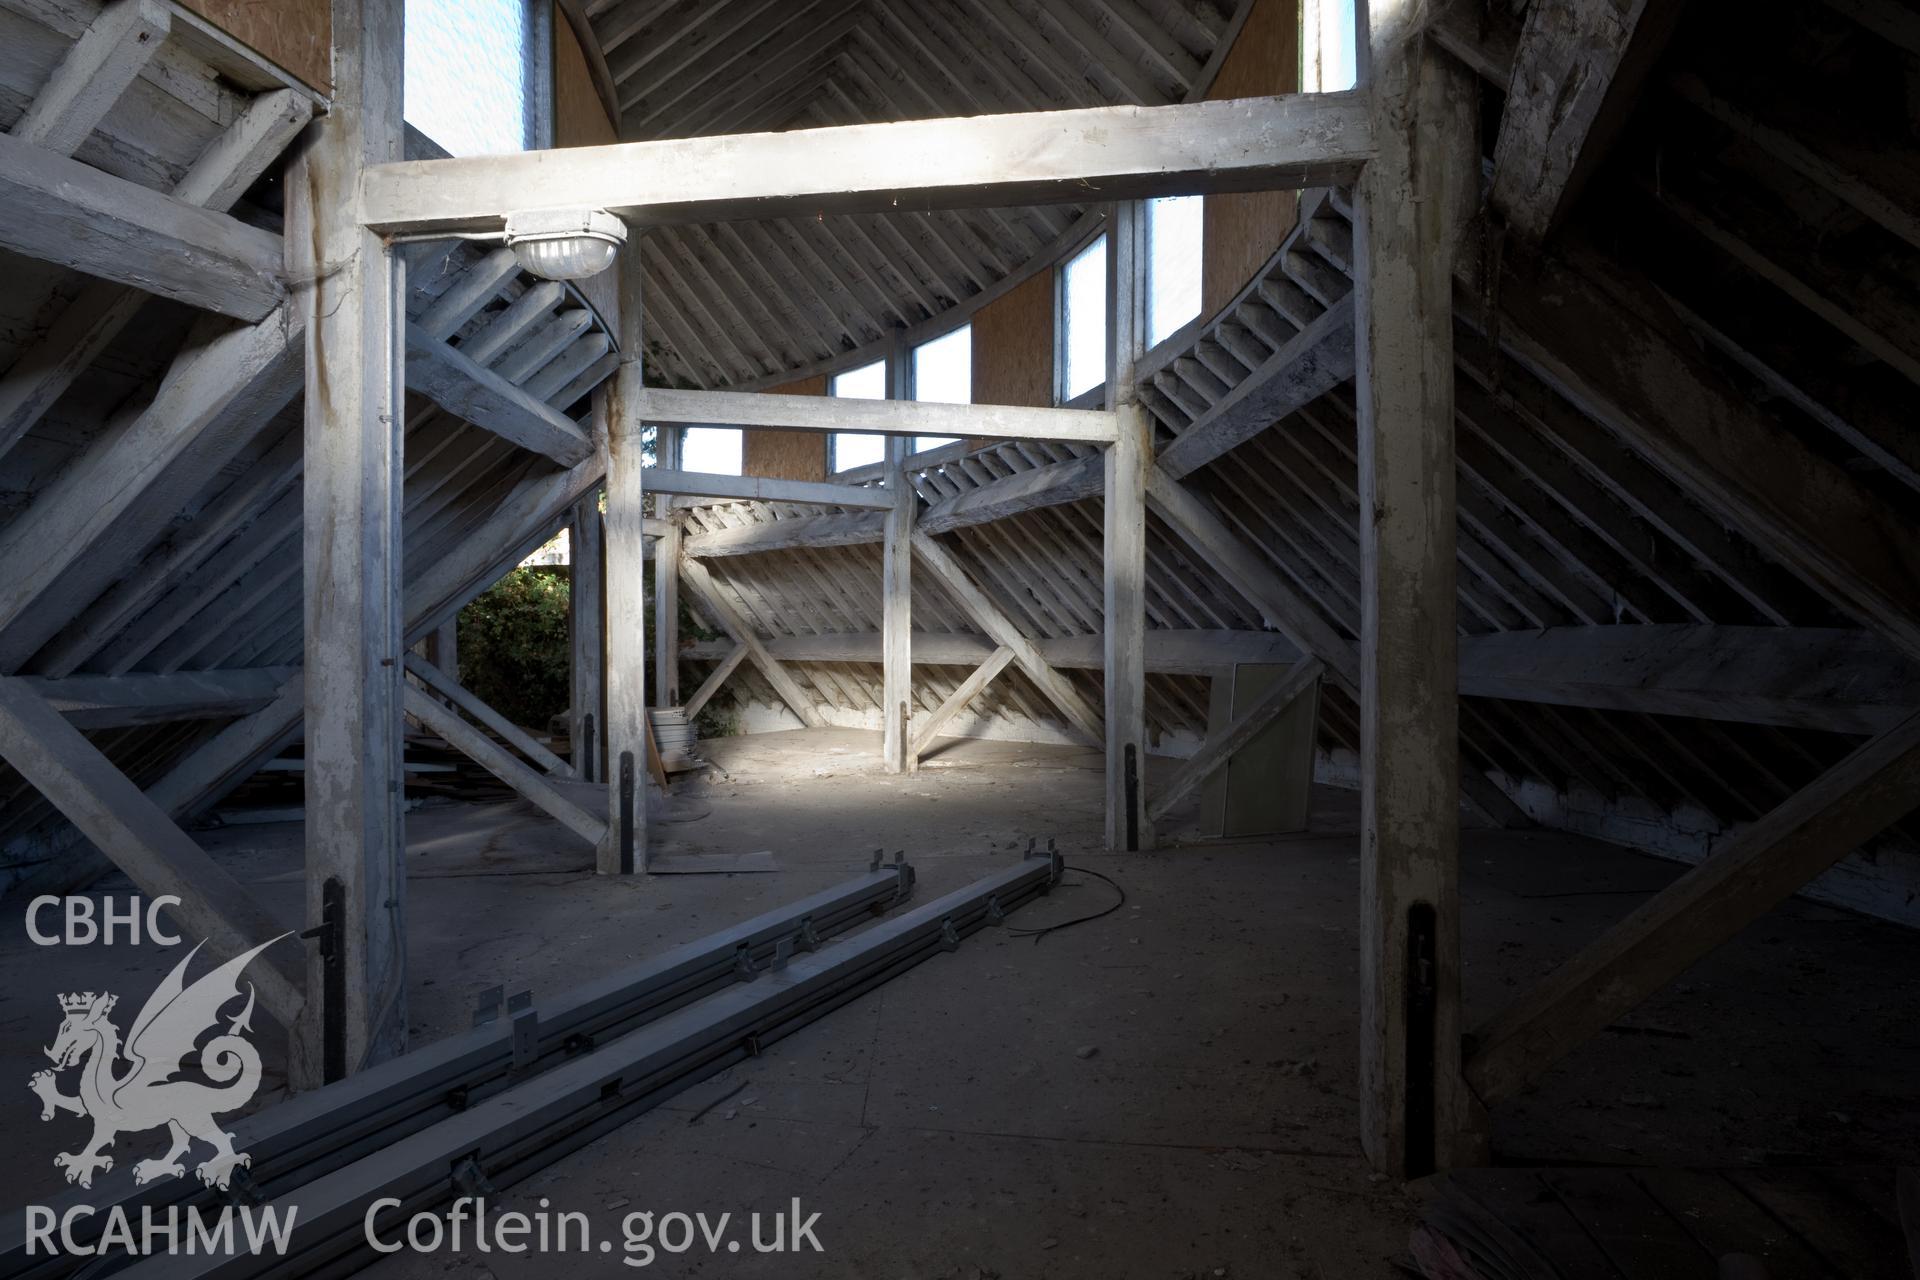 Roof structure of piggery.